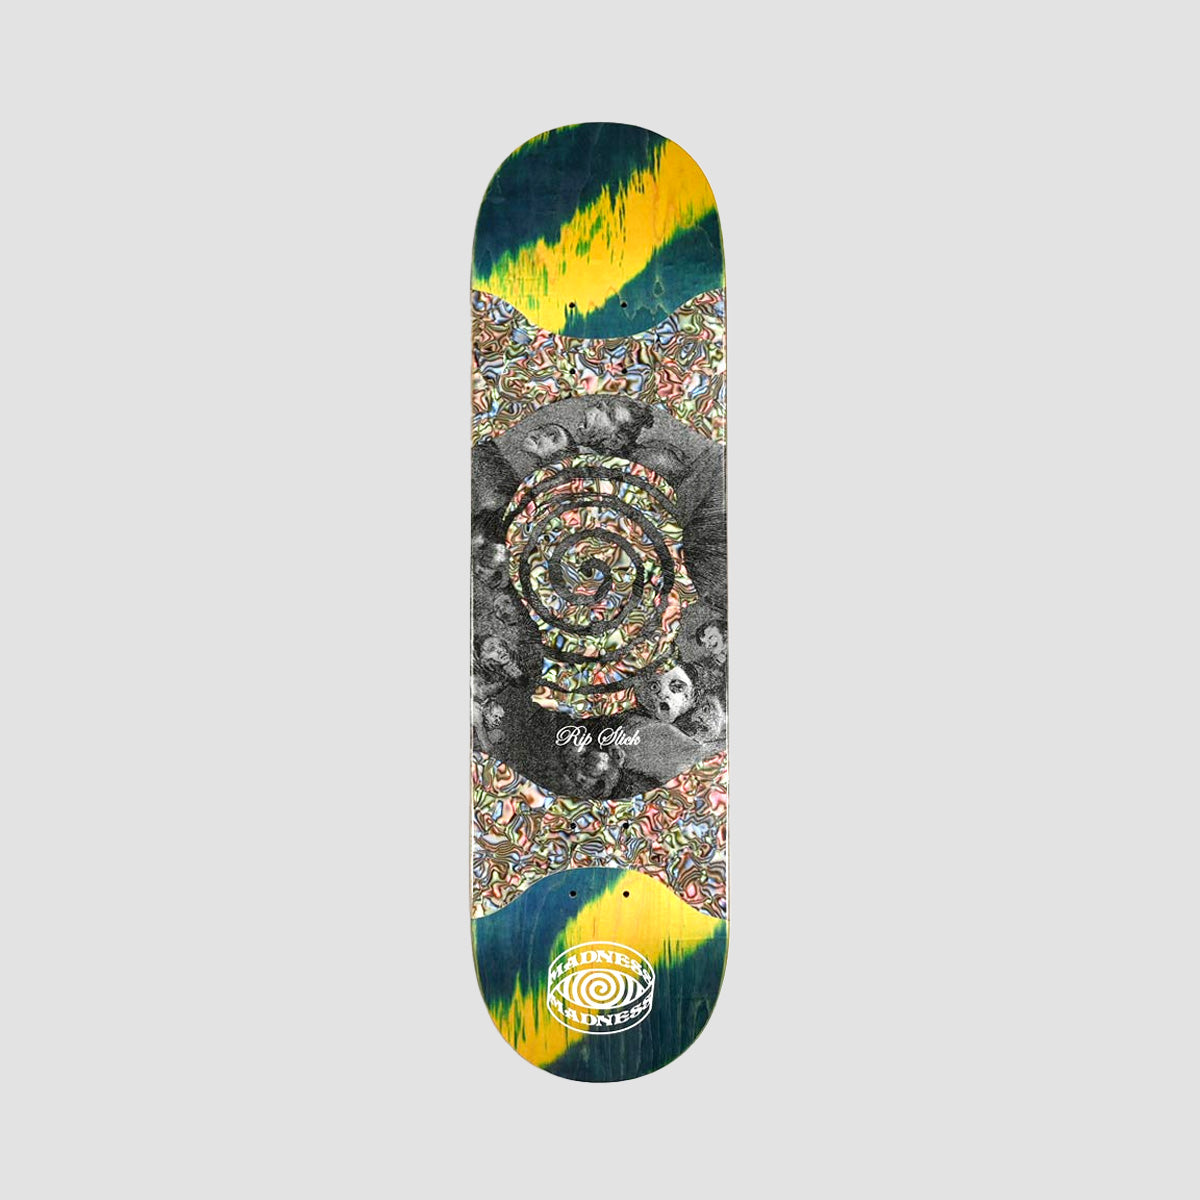 Madness Voices R7 Slick on Middle Section Skateboard Deck Green/Multi - 8.125"